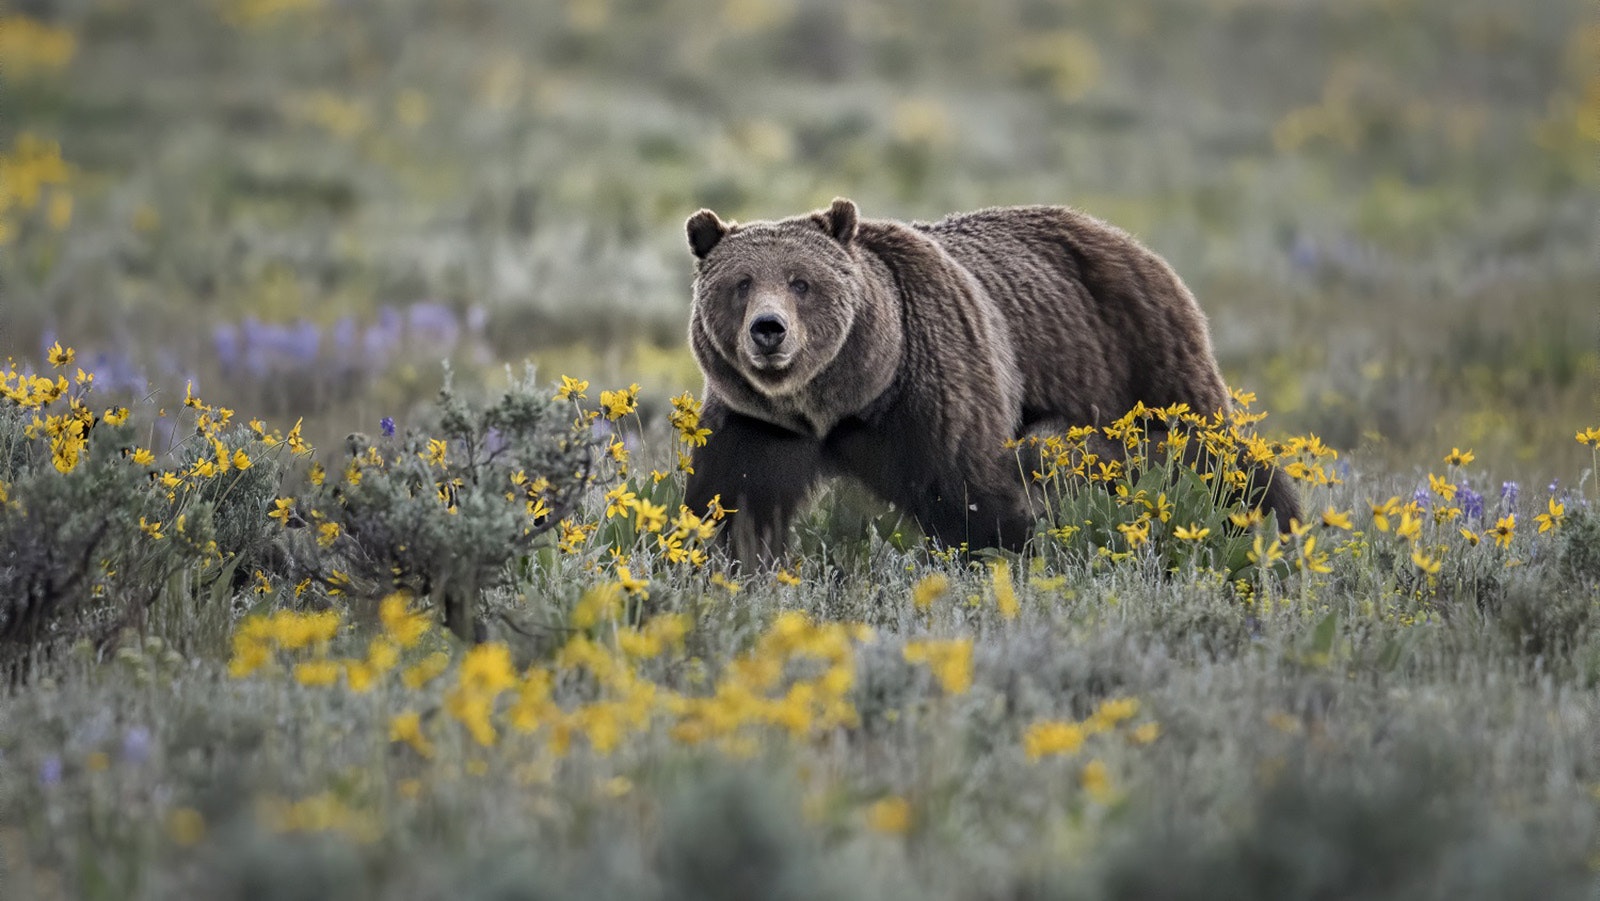 Grizzly 399, Wyoming’s most famous bear, pictured here last summer, has yet to be seen this spring.